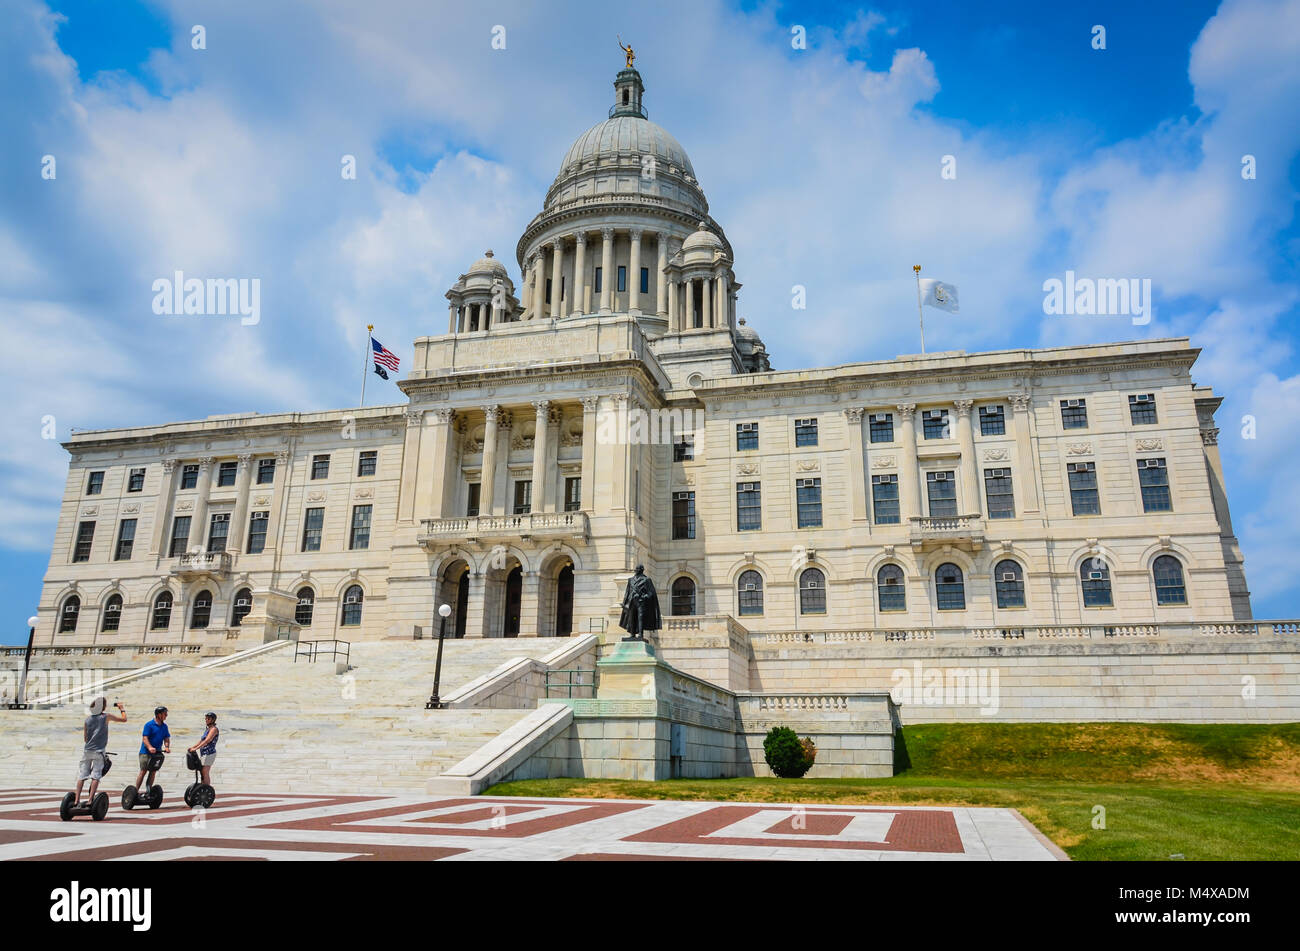 Providence, Rhode Island, USA. Segway tour to the Rhode Island State House, a neoclassical building housing the Rhode Island General Assembly. Stock Photo